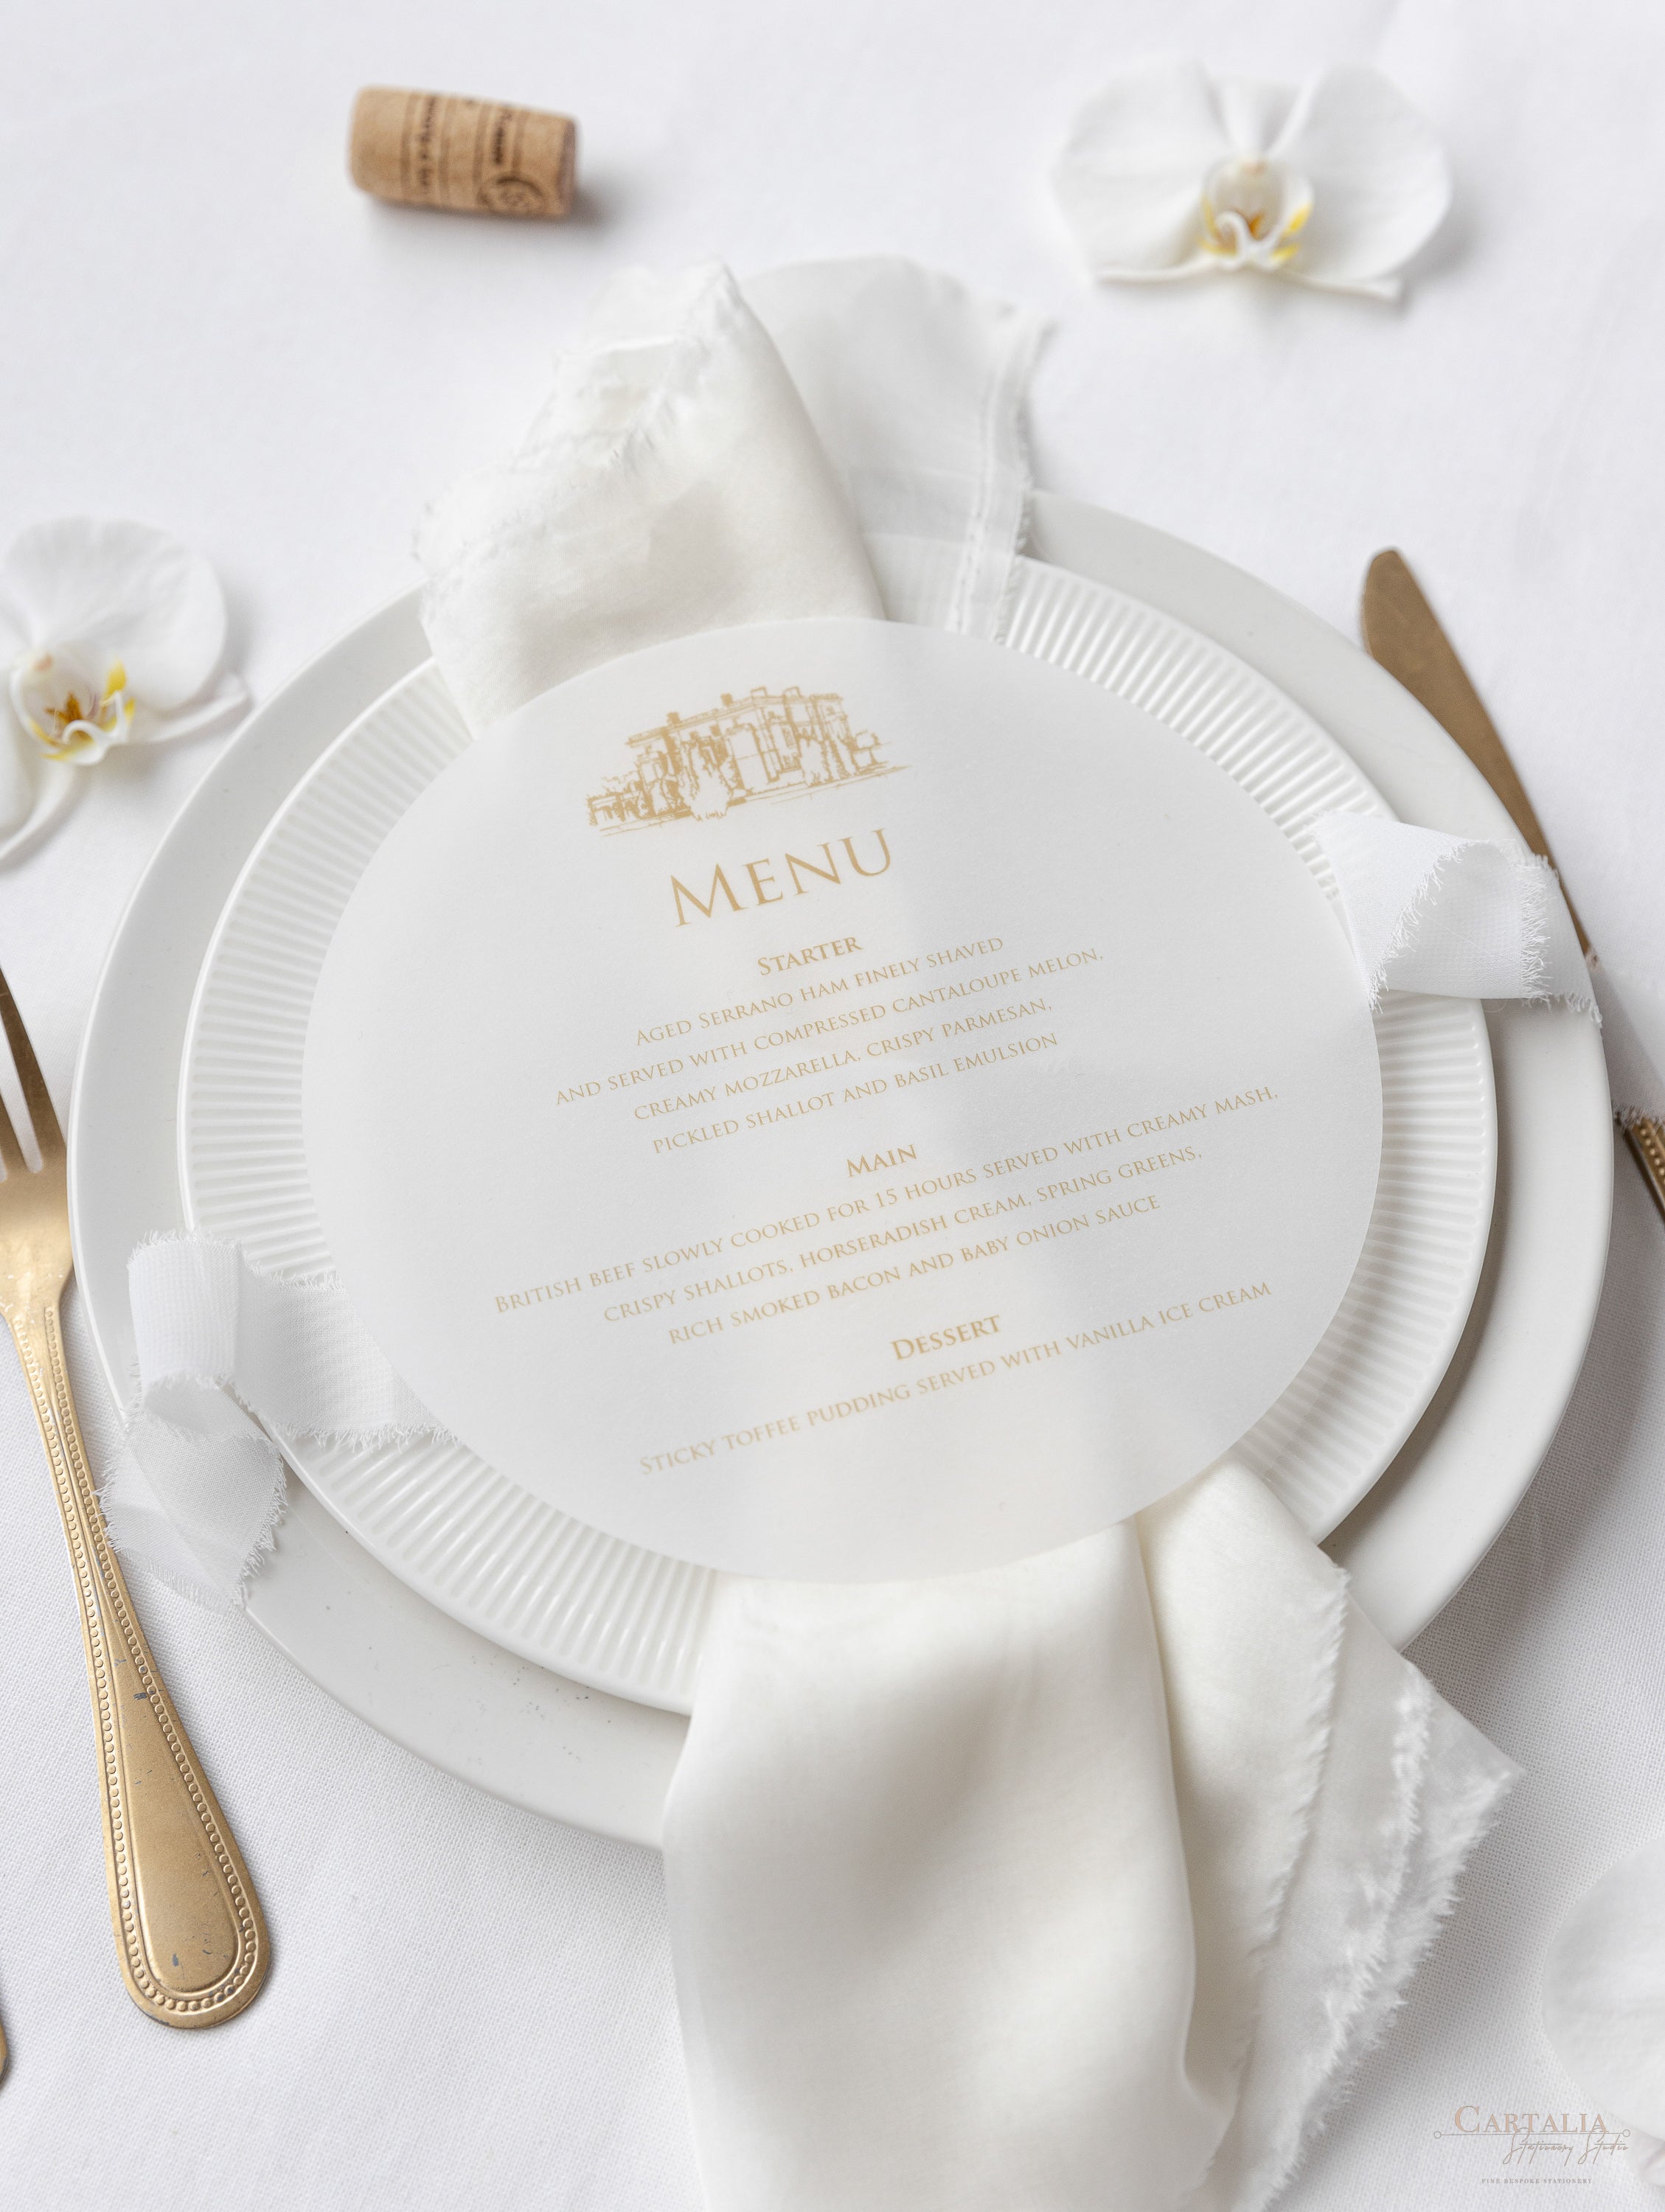 A menu card in off-white shades with a punched-out church and vellum paper